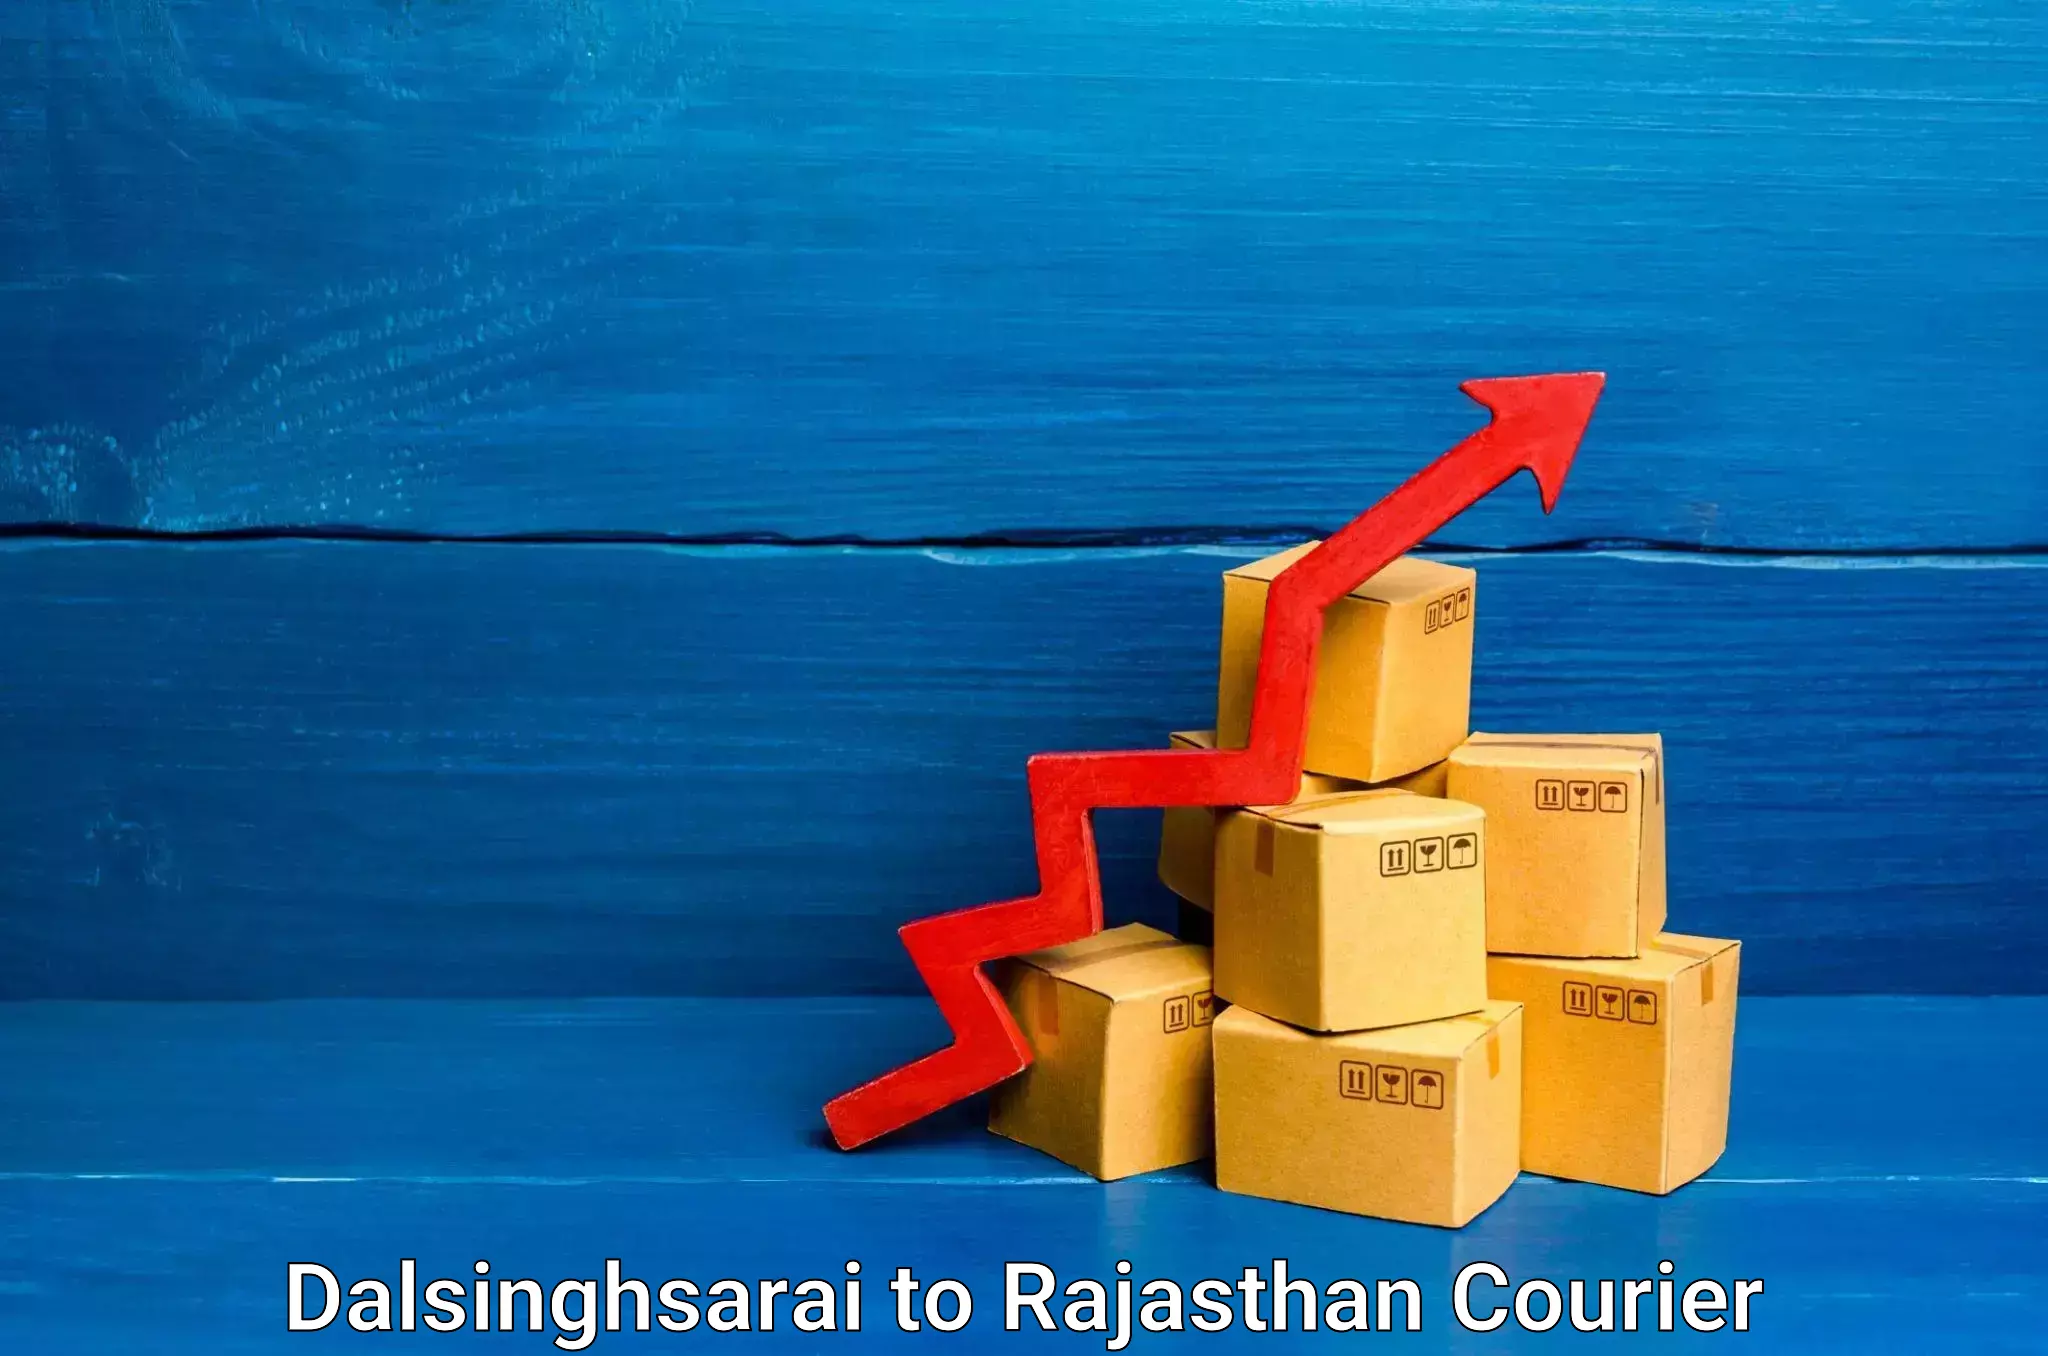 Furniture moving services Dalsinghsarai to Rajasthan